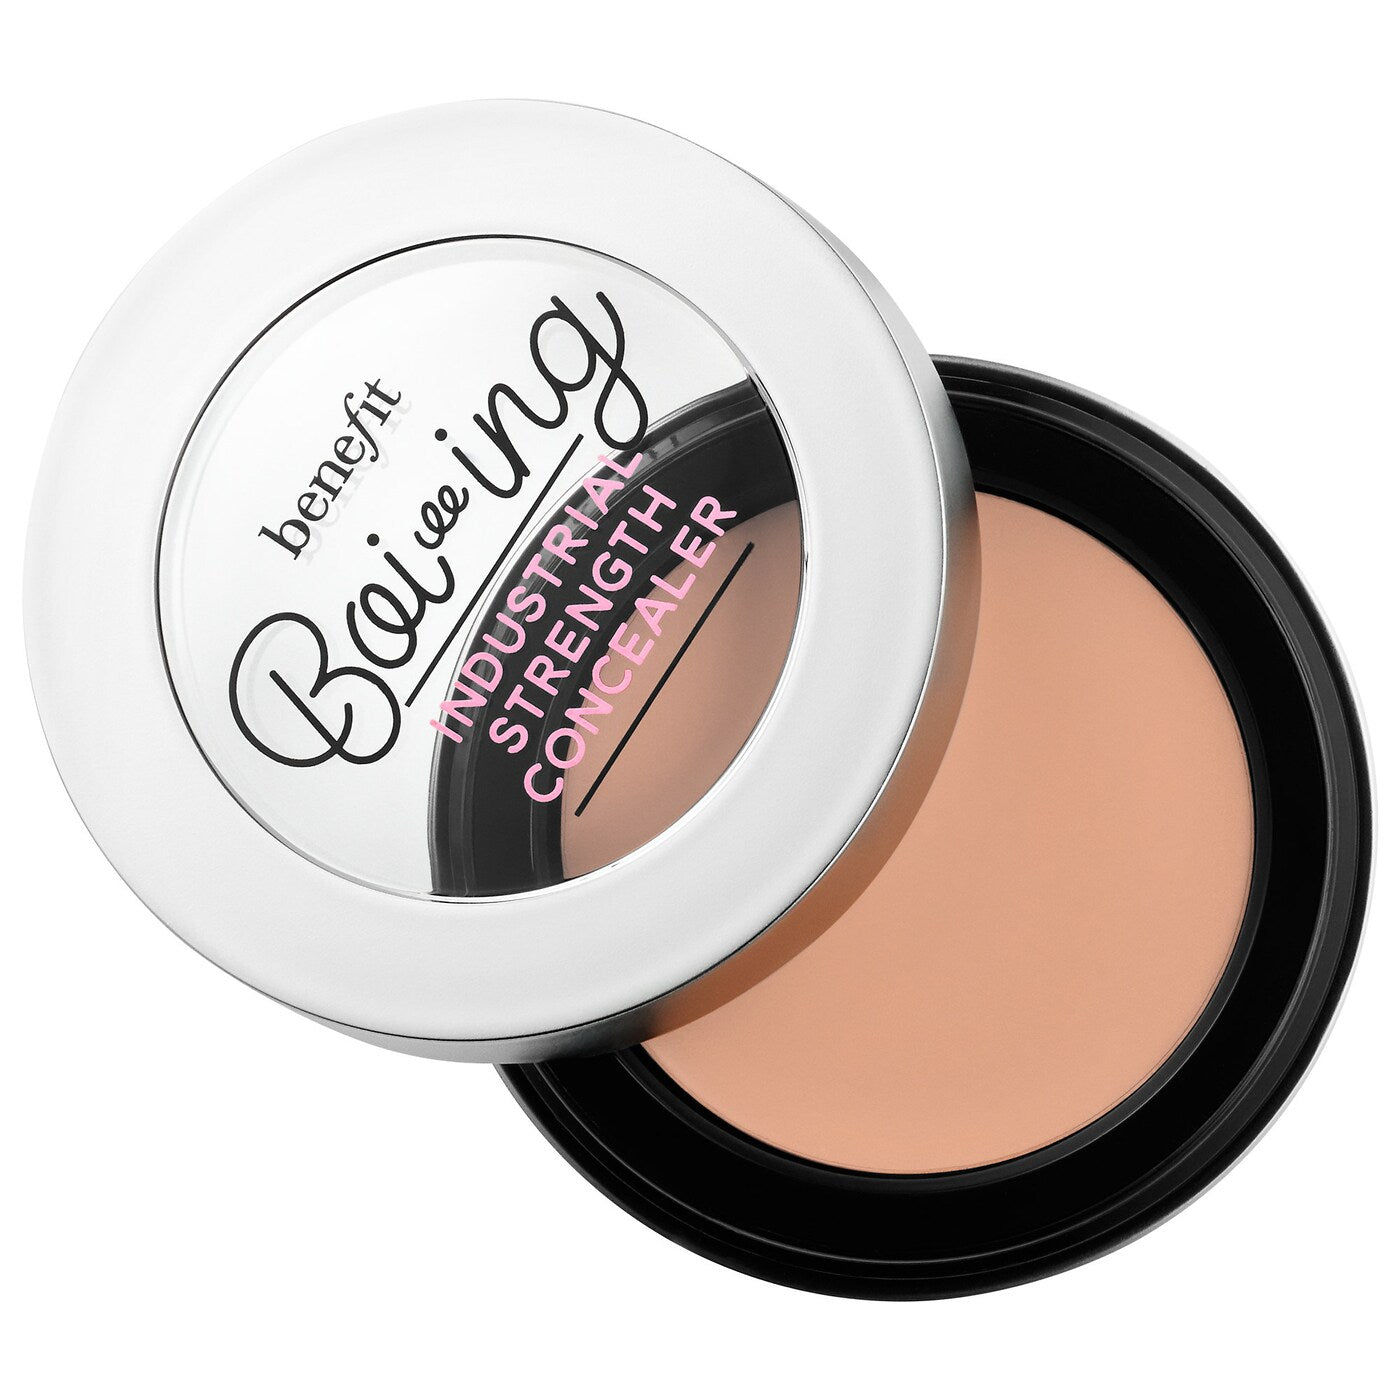 Benefit - Boi-ing Industrial Strength Full Coverage Cream Concealer | 3 g